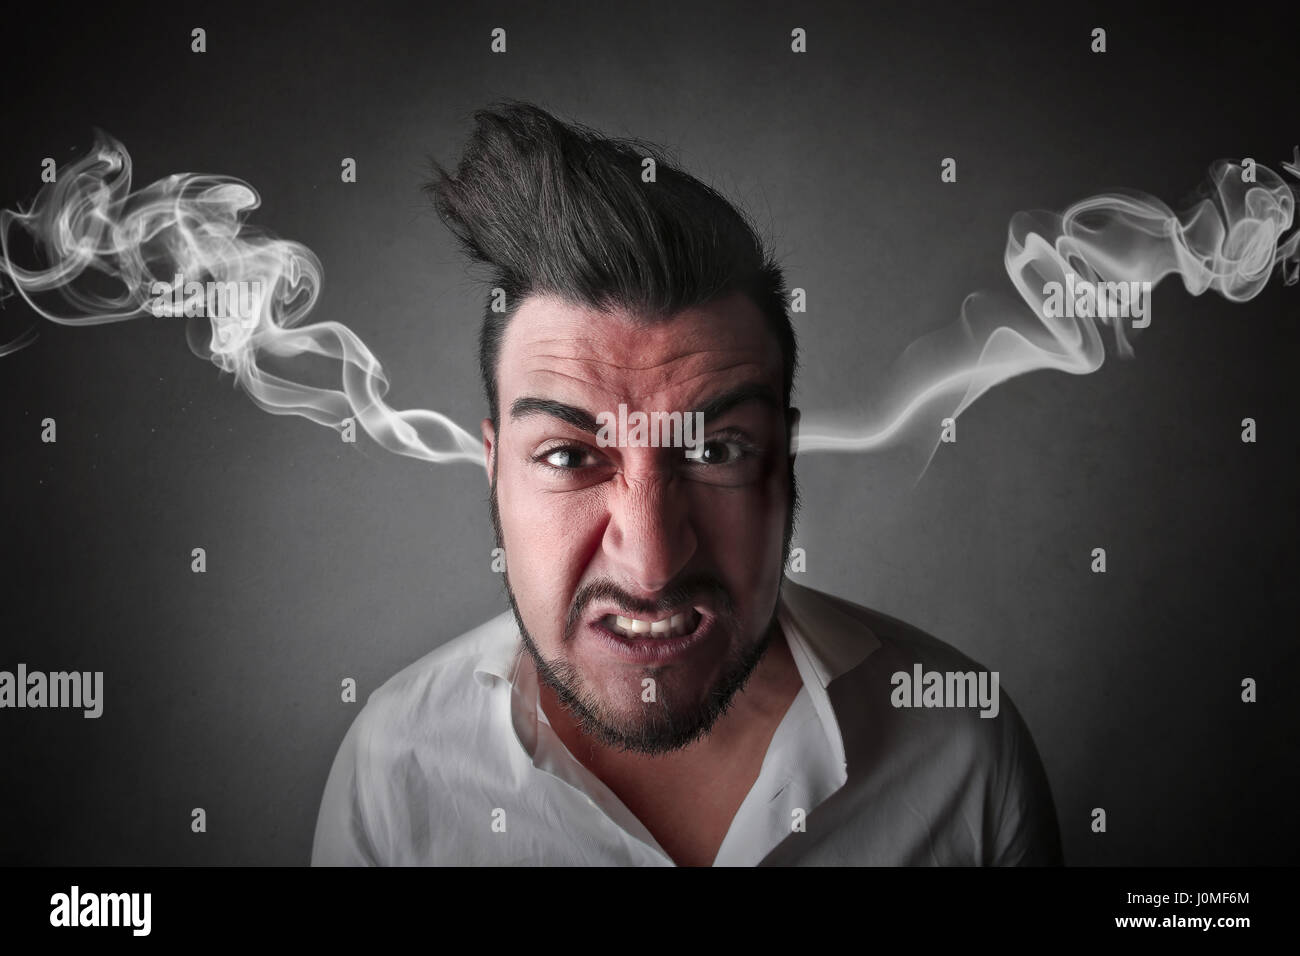 Mad man steaming Stock Photo